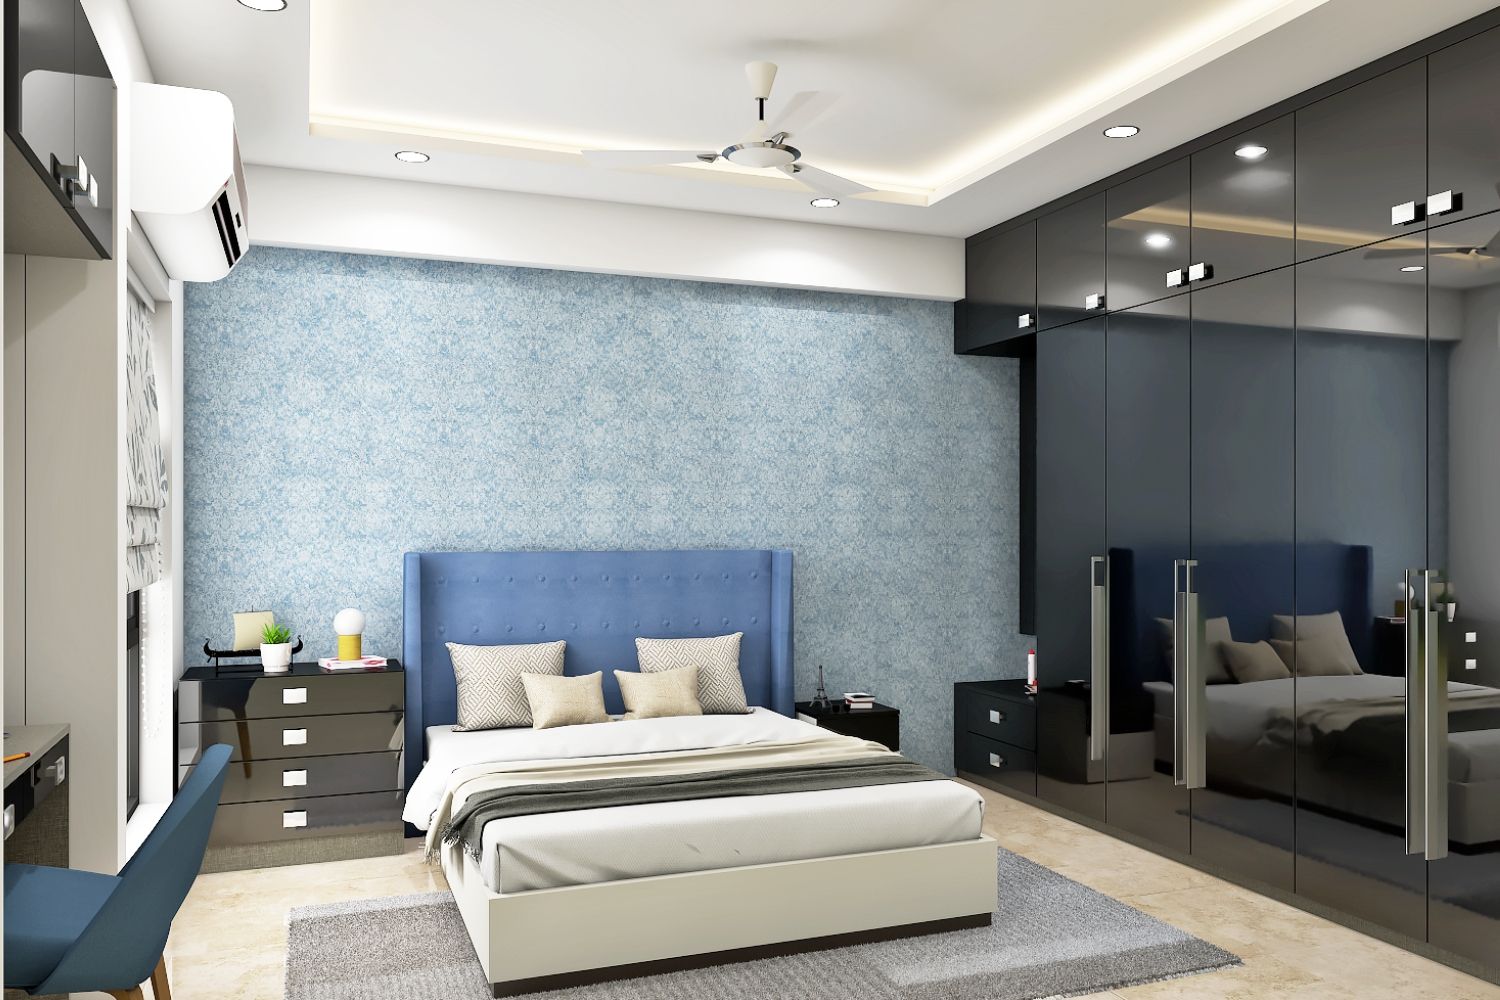 Modern Master Bedroom Design With Blue And White Damask Wallpaper